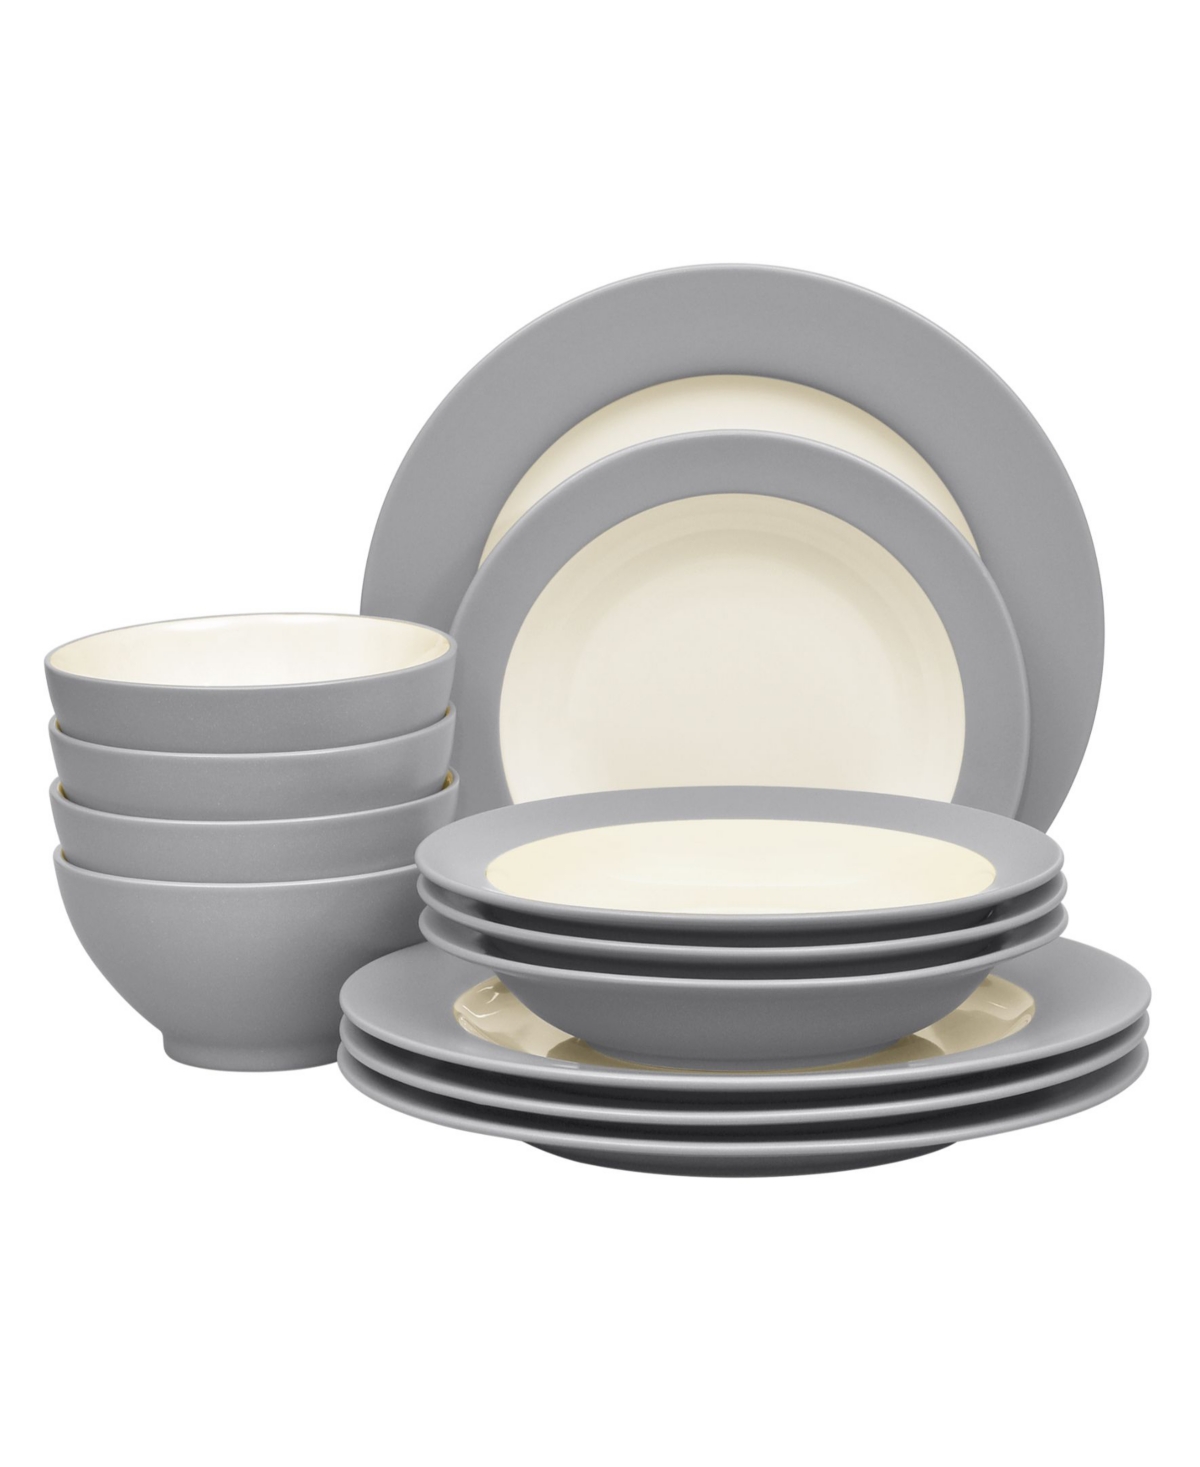 Colorwave Rim 12-Piece Dinnerware Set, Service for 4, Created for Macy's - Blue